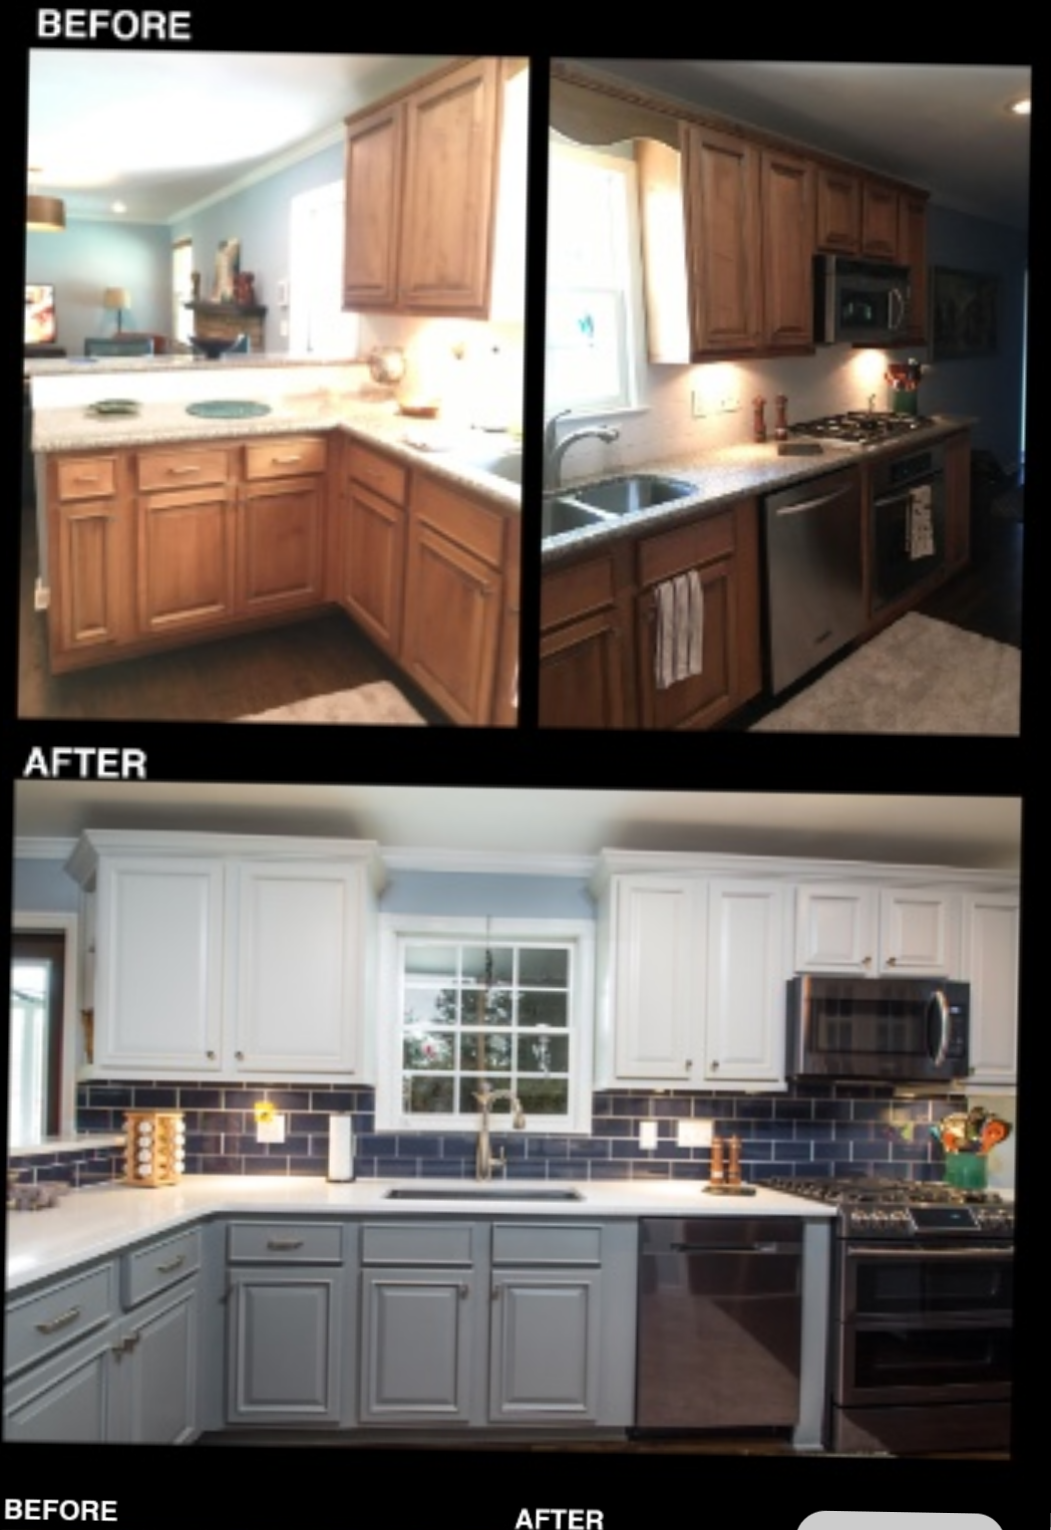 Kitchen Cabinet Painting Company in Denver - Painting Kitchen Cabinets